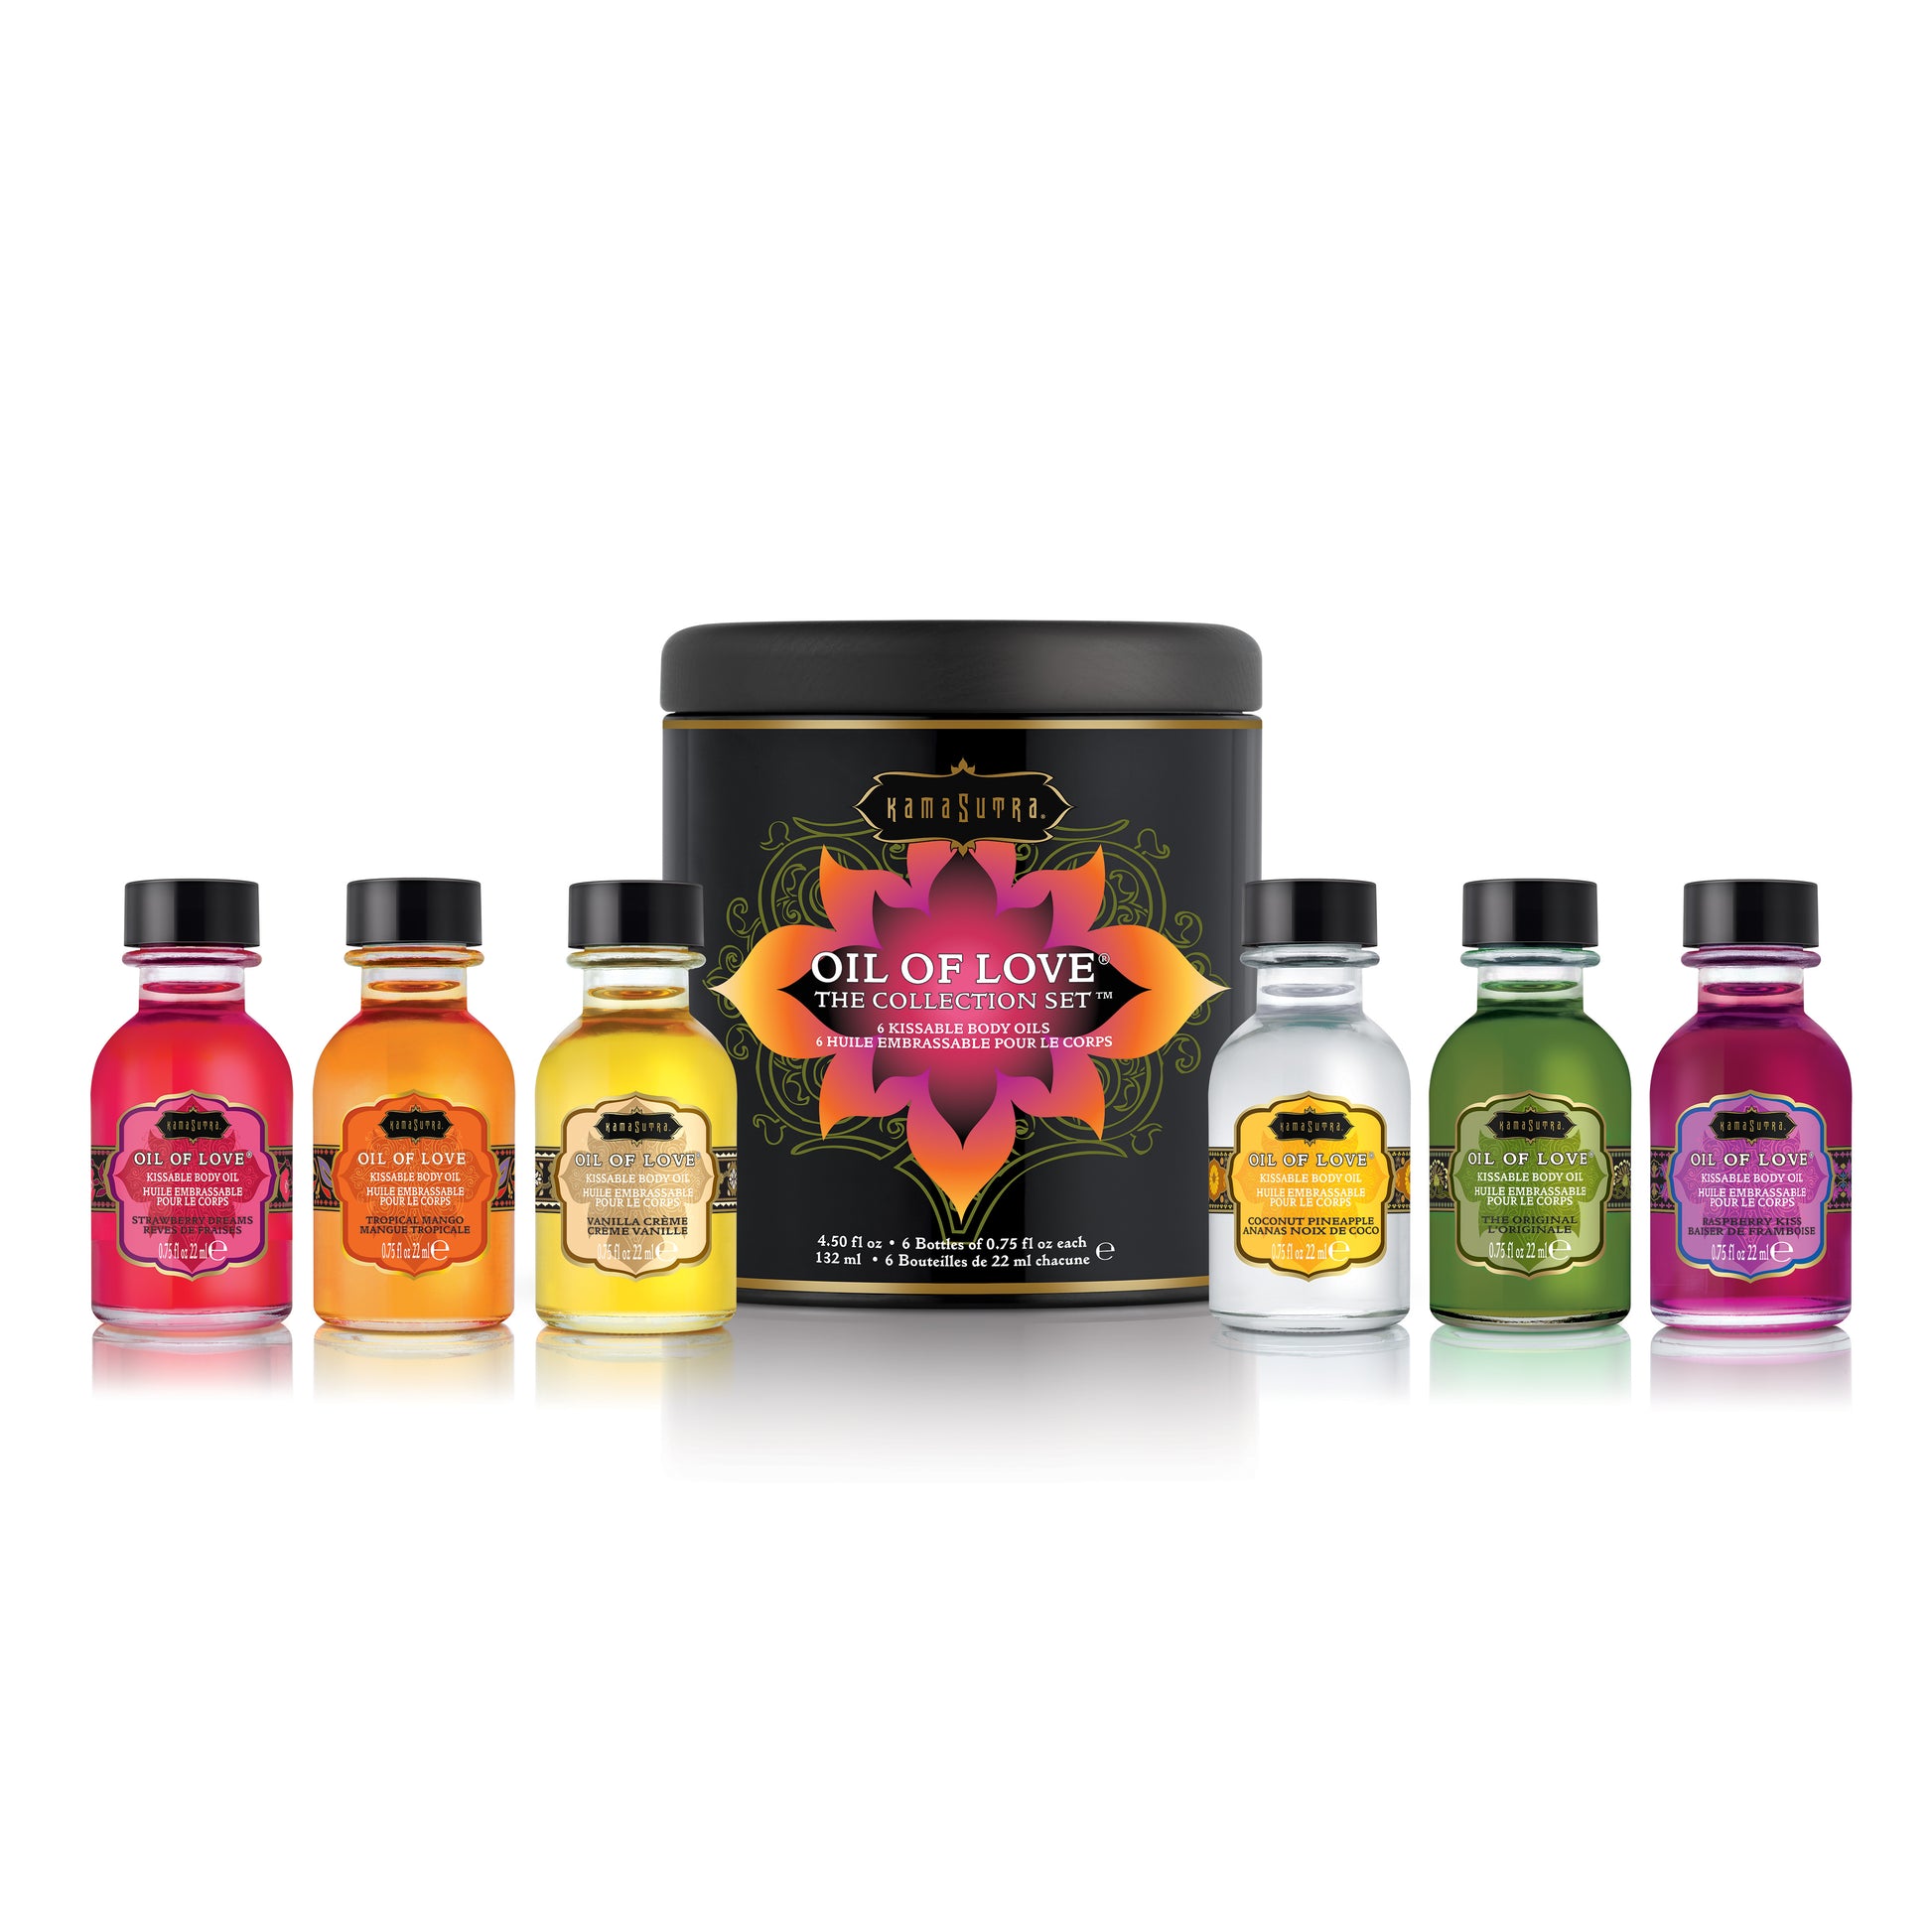 Oil of Love - the Collection Set - 6 Flavors KS12008